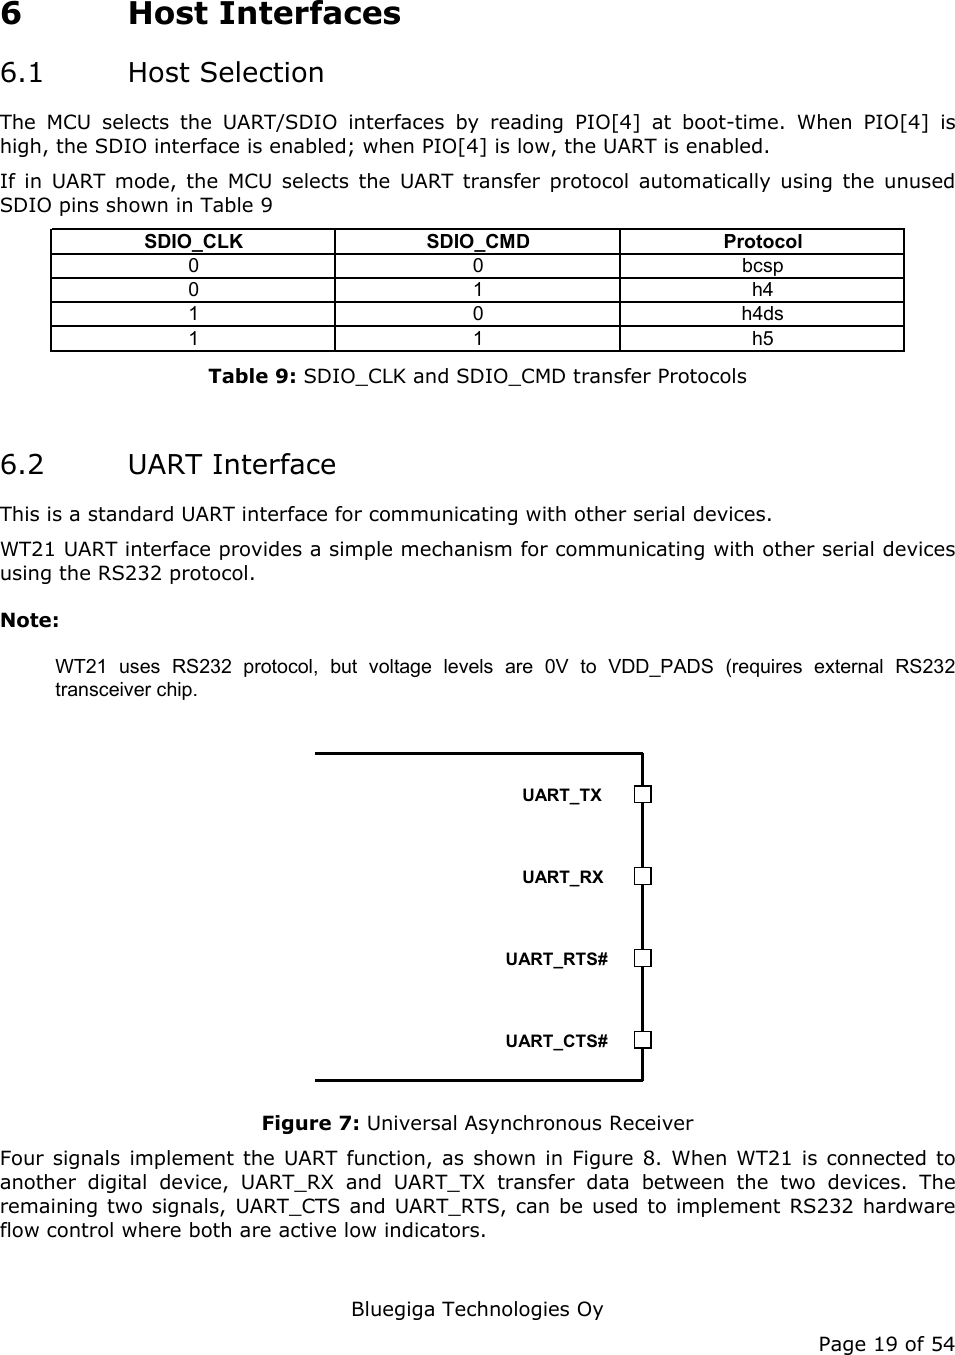   Bluegiga Technologies Oy Page 19 of 54 6 Host Interfaces 6.1 Host Selection The MCU selects the UART/SDIO interfaces by reading PIO[4] at boot-time. When PIO[4] is high, the SDIO interface is enabled; when PIO[4] is low, the UART is enabled. If in UART mode, the MCU selects the UART transfer protocol automatically using the unused SDIO pins shown in Table 9 SDIO_CLK SDIO_CMD Protocol0 0 bcsp01h41 0 h4ds11h5 Table 9: SDIO_CLK and SDIO_CMD transfer Protocols  6.2 UART Interface This is a standard UART interface for communicating with other serial devices. WT21 UART interface provides a simple mechanism for communicating with other serial devices using the RS232 protocol.  Note: WT21 uses RS232 protocol, but voltage levels are 0V to VDD_PADS (requires external RS232 transceiver chip. UART_TXUART_RXUART_RTS#UART_CTS# Figure 7: Universal Asynchronous Receiver Four signals implement the UART function, as shown in Figure 8. When WT21 is connected to another digital device, UART_RX and UART_TX transfer data between the two devices. The remaining two signals, UART_CTS and UART_RTS, can be used to implement RS232 hardware flow control where both are active low indicators. 